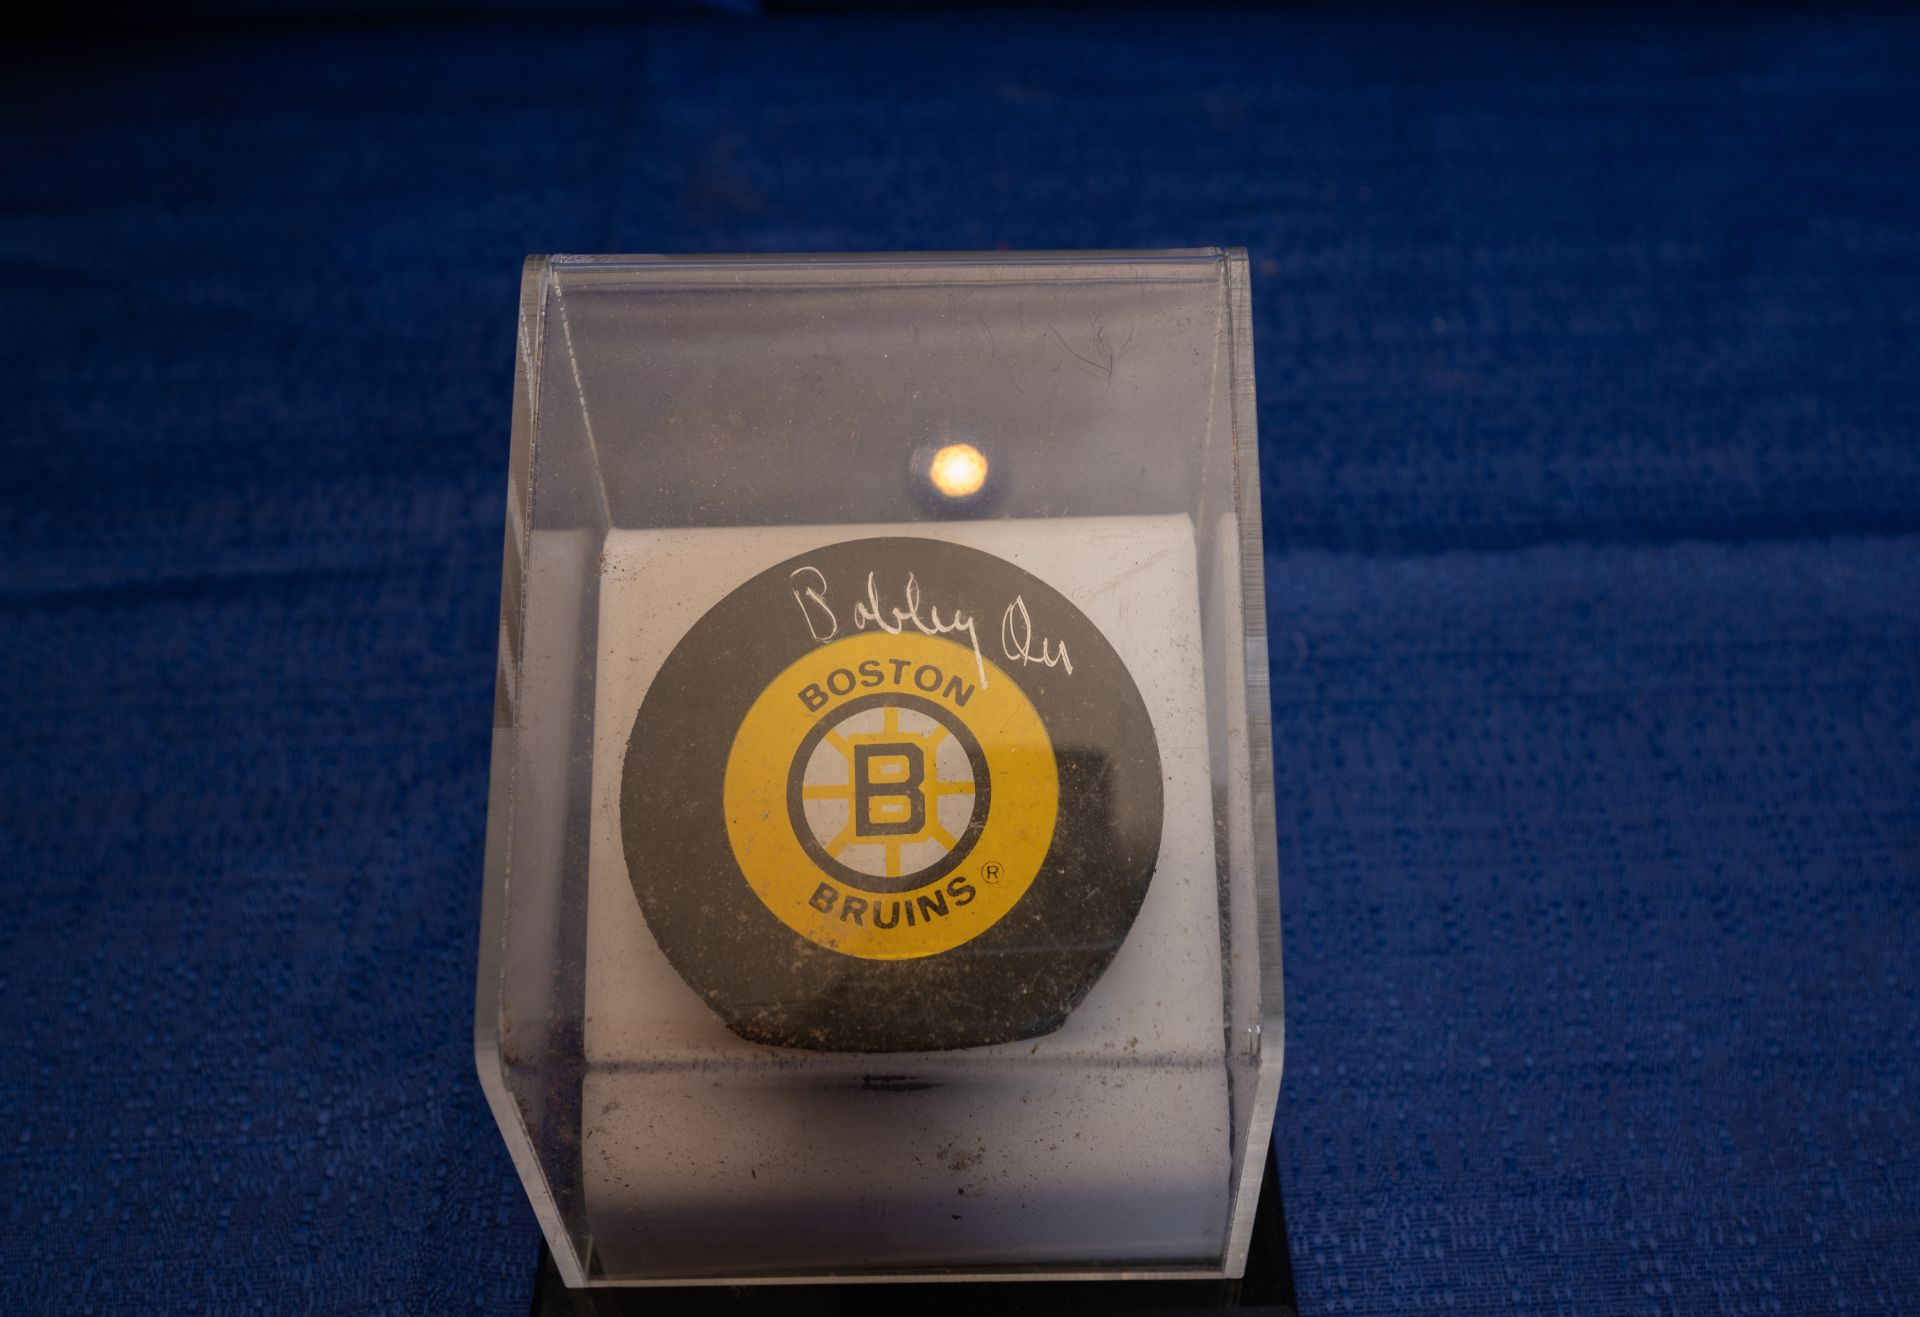 Autographed Bruins Puck Signed "Bobby Orr" w/ Headline Sports COA year 1993